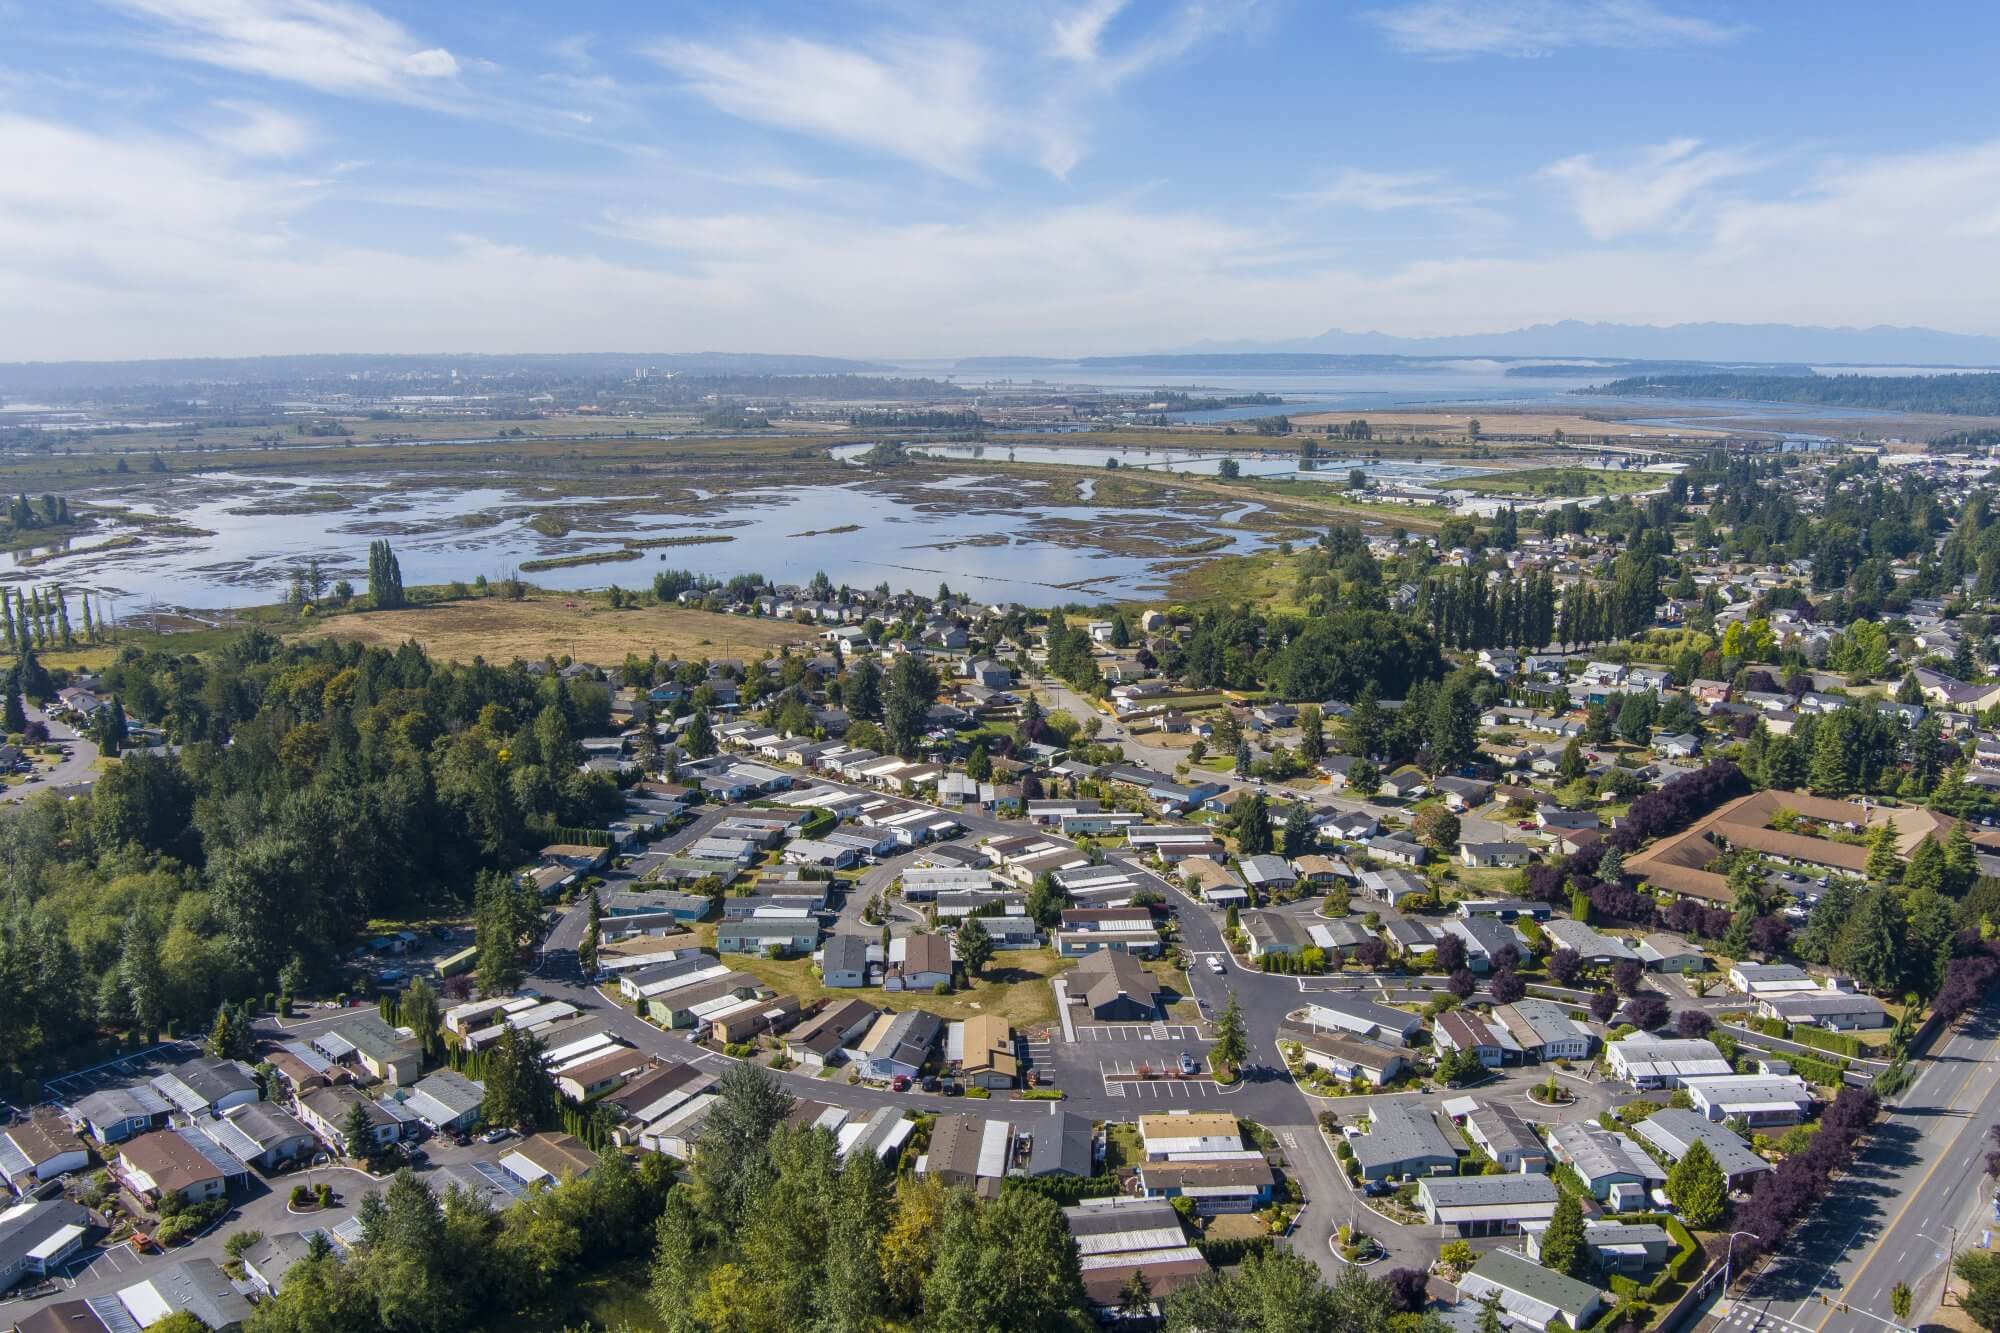 Aerial view of a manufactured home community in Marysville, surrounded by tall trees and a lake in the background.